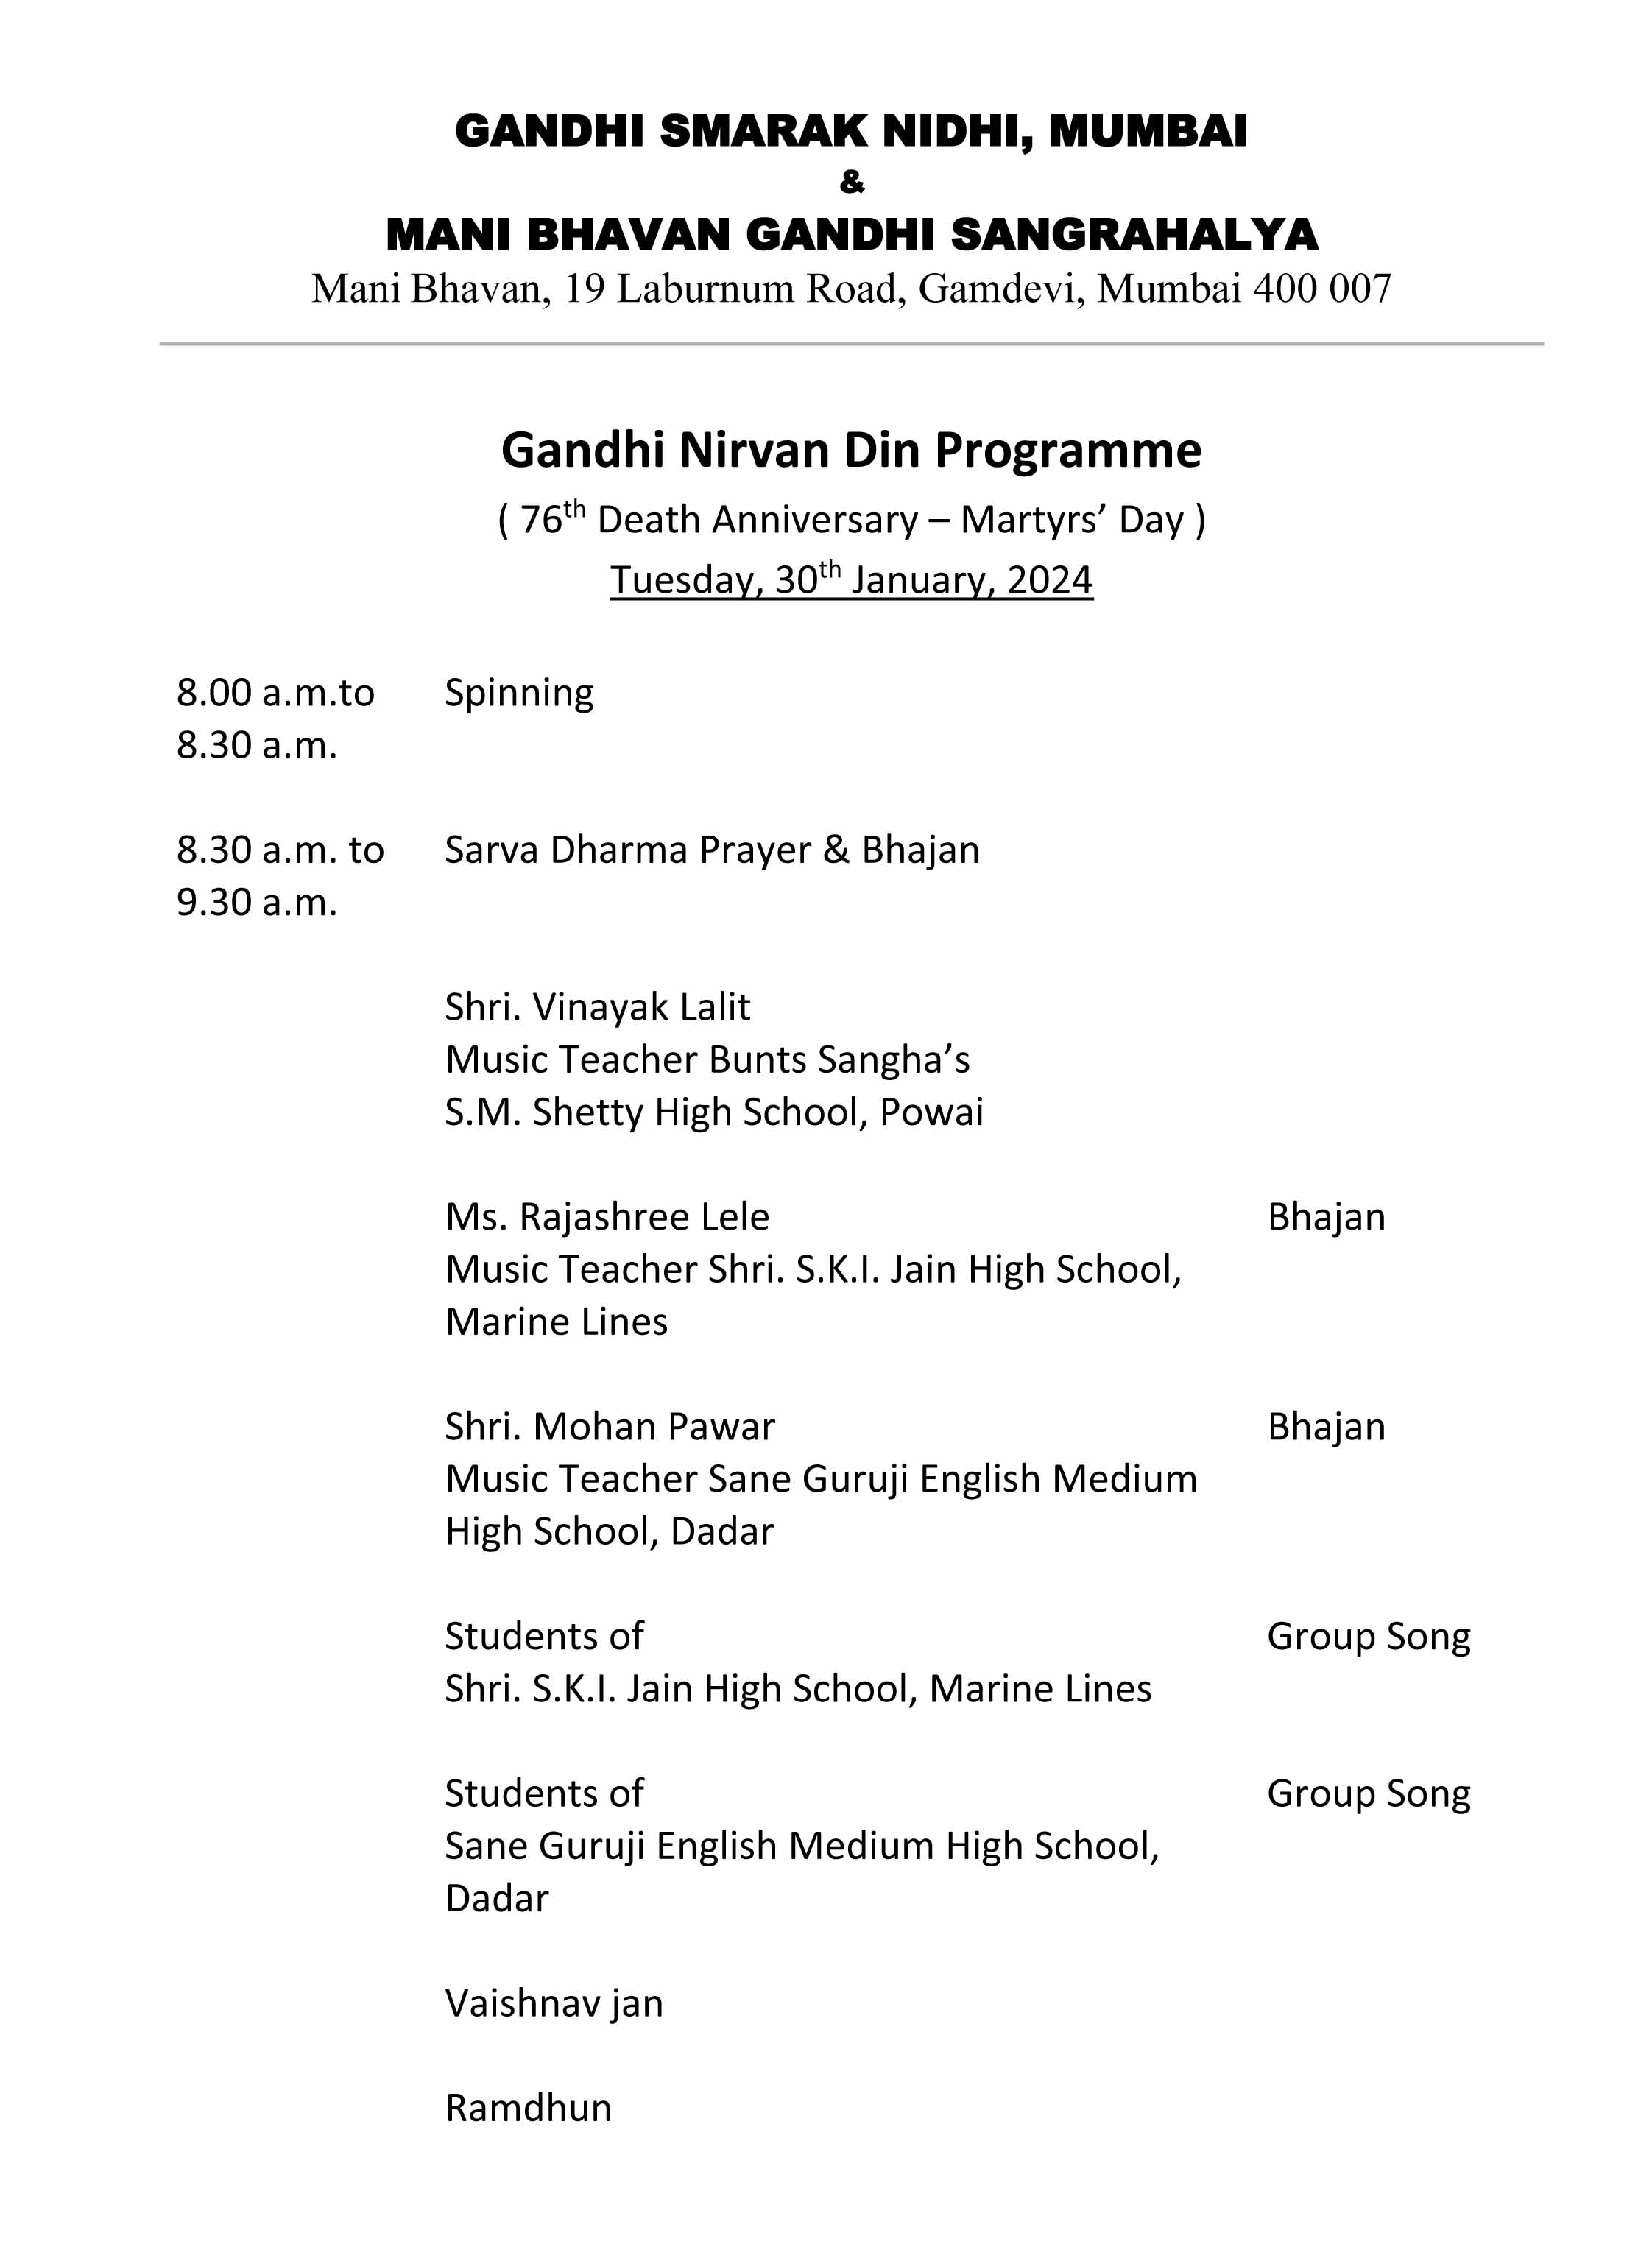 Invitation: Gandhi Nirvan Din - Martyrs' Day programme on the occasion of the 76th Death Anniversary of Mahatma Gandhi on 30th January 2024.